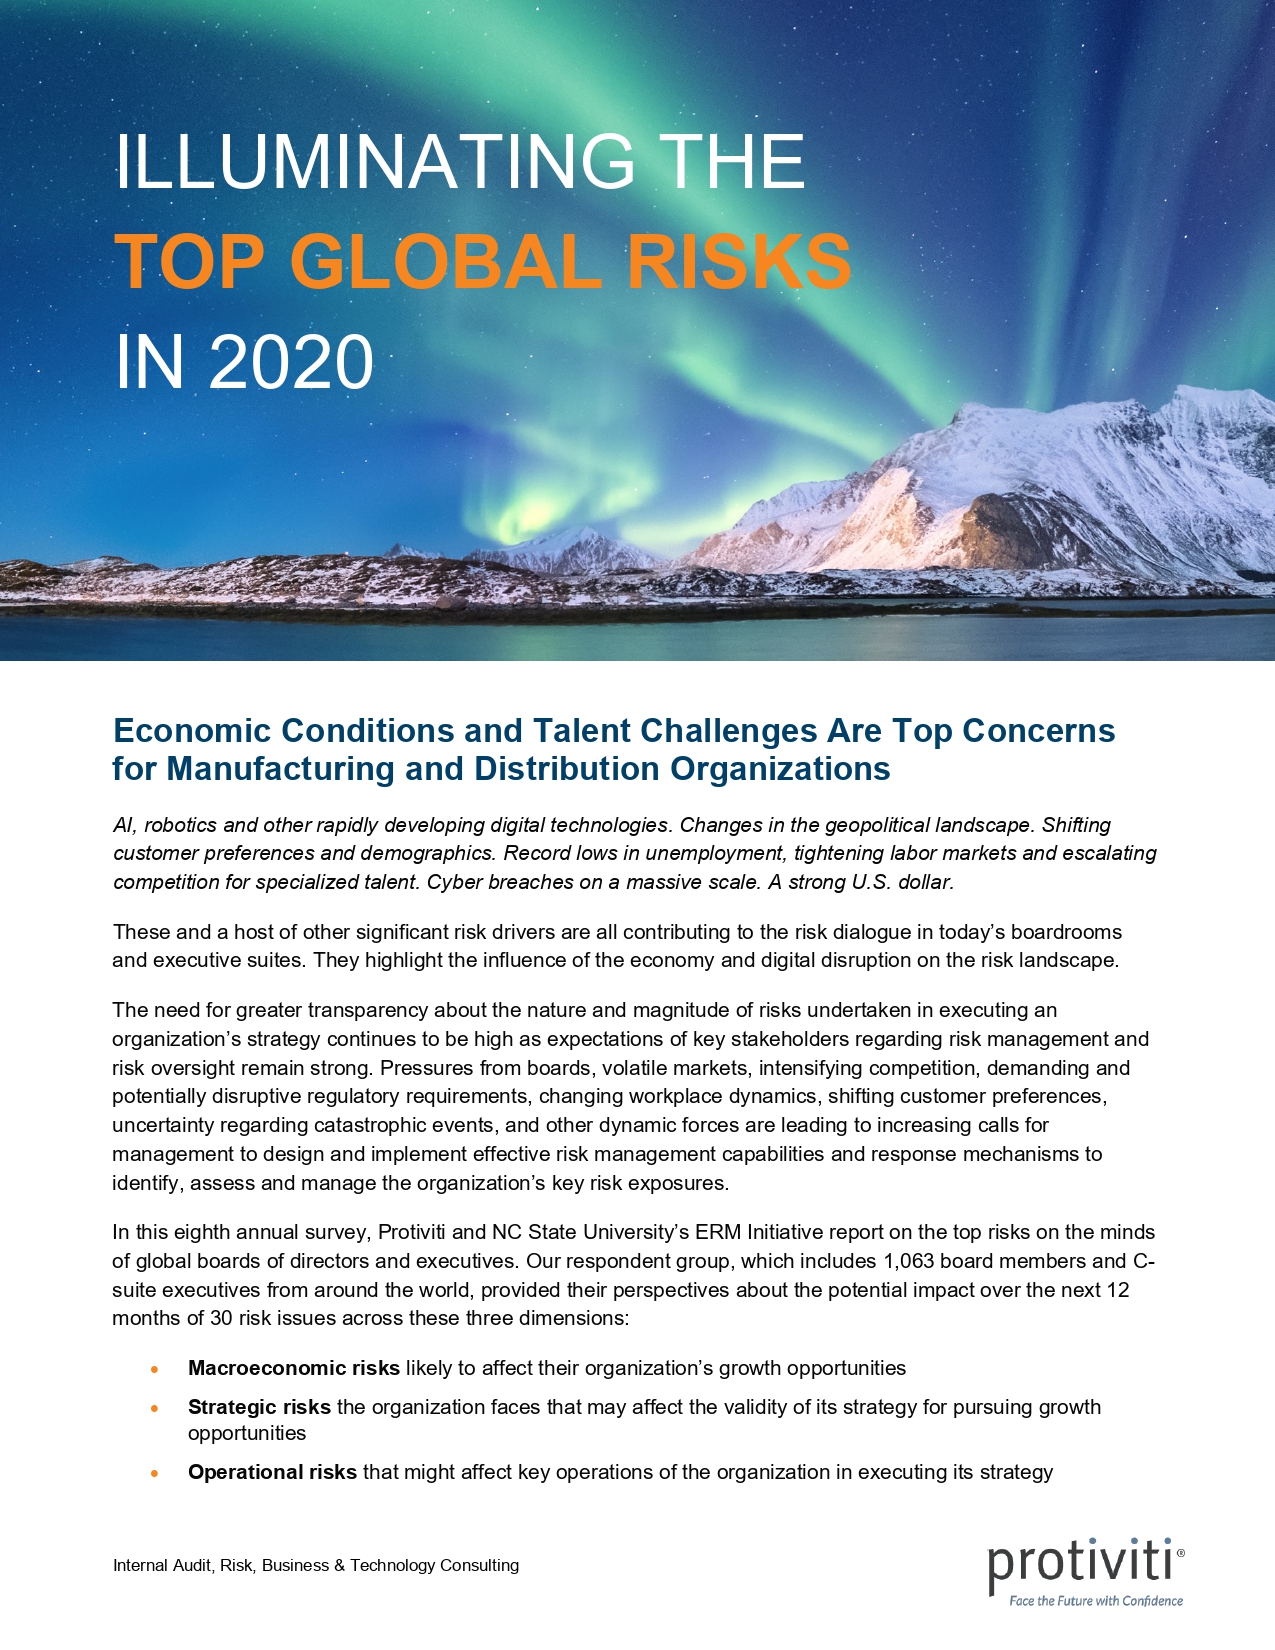 Screenshot of the first page of Executive Perspectives on Top Risks in 2020 - Manufacturing and Distribution Industry Group Results